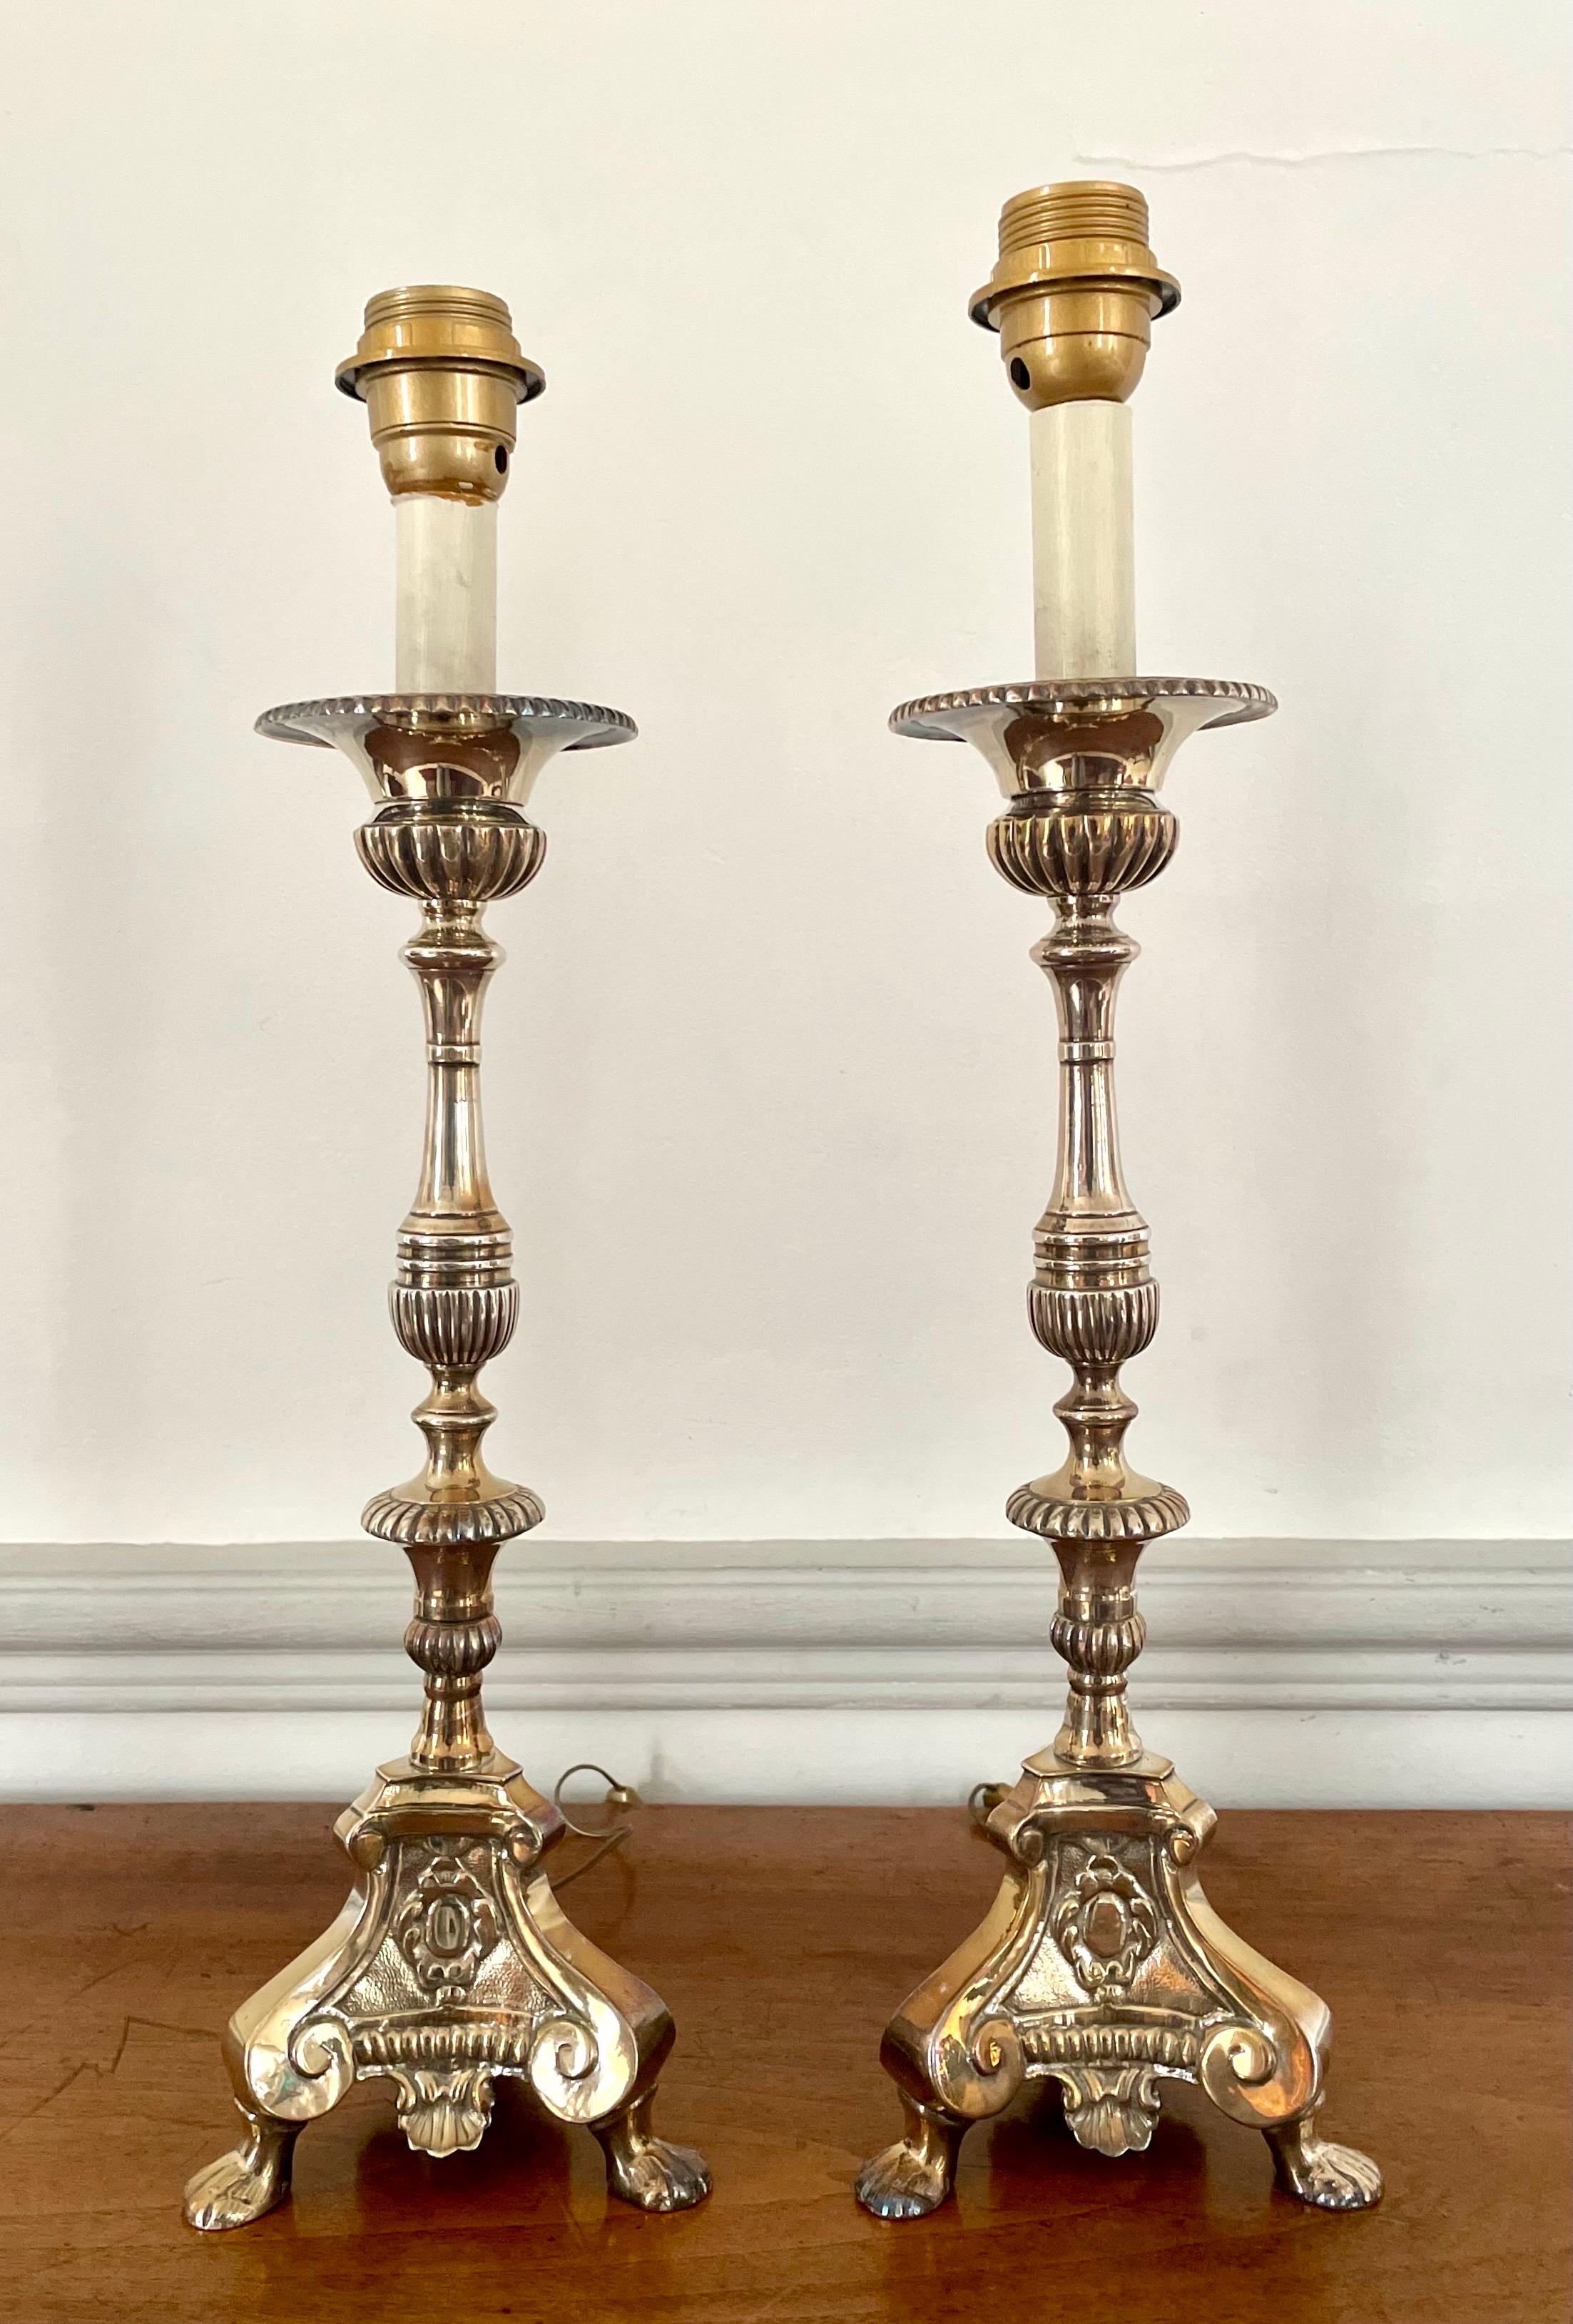 Very nice pair of church or altar candlesticks in silver metal.
The wear of the silver gives them a magnificent patina.
Louis XIV-style
Nineteenth century.
These pretty candleholders / torchieres are mounted as a lamp to be easily used in modern